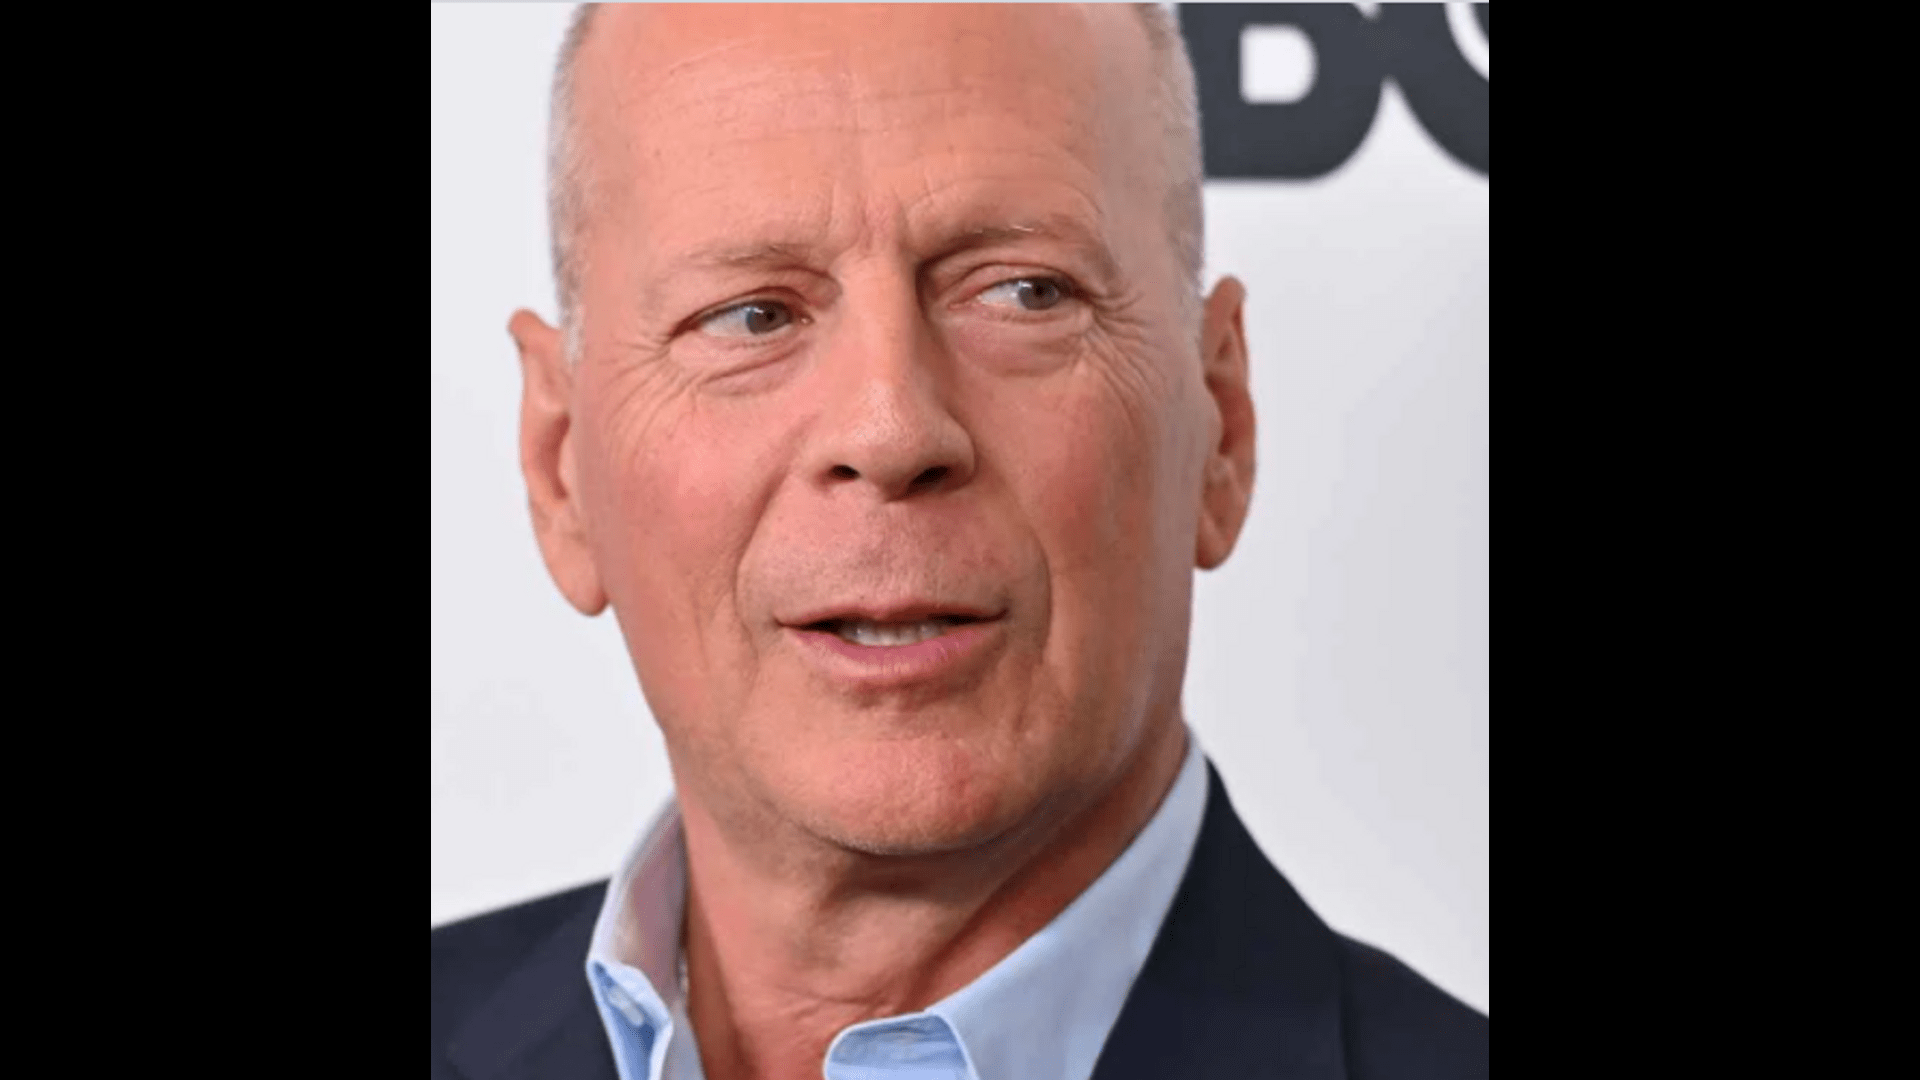 The Razzies consider removing the special category they created for Bruce Willis after his diagnosis of aphasia